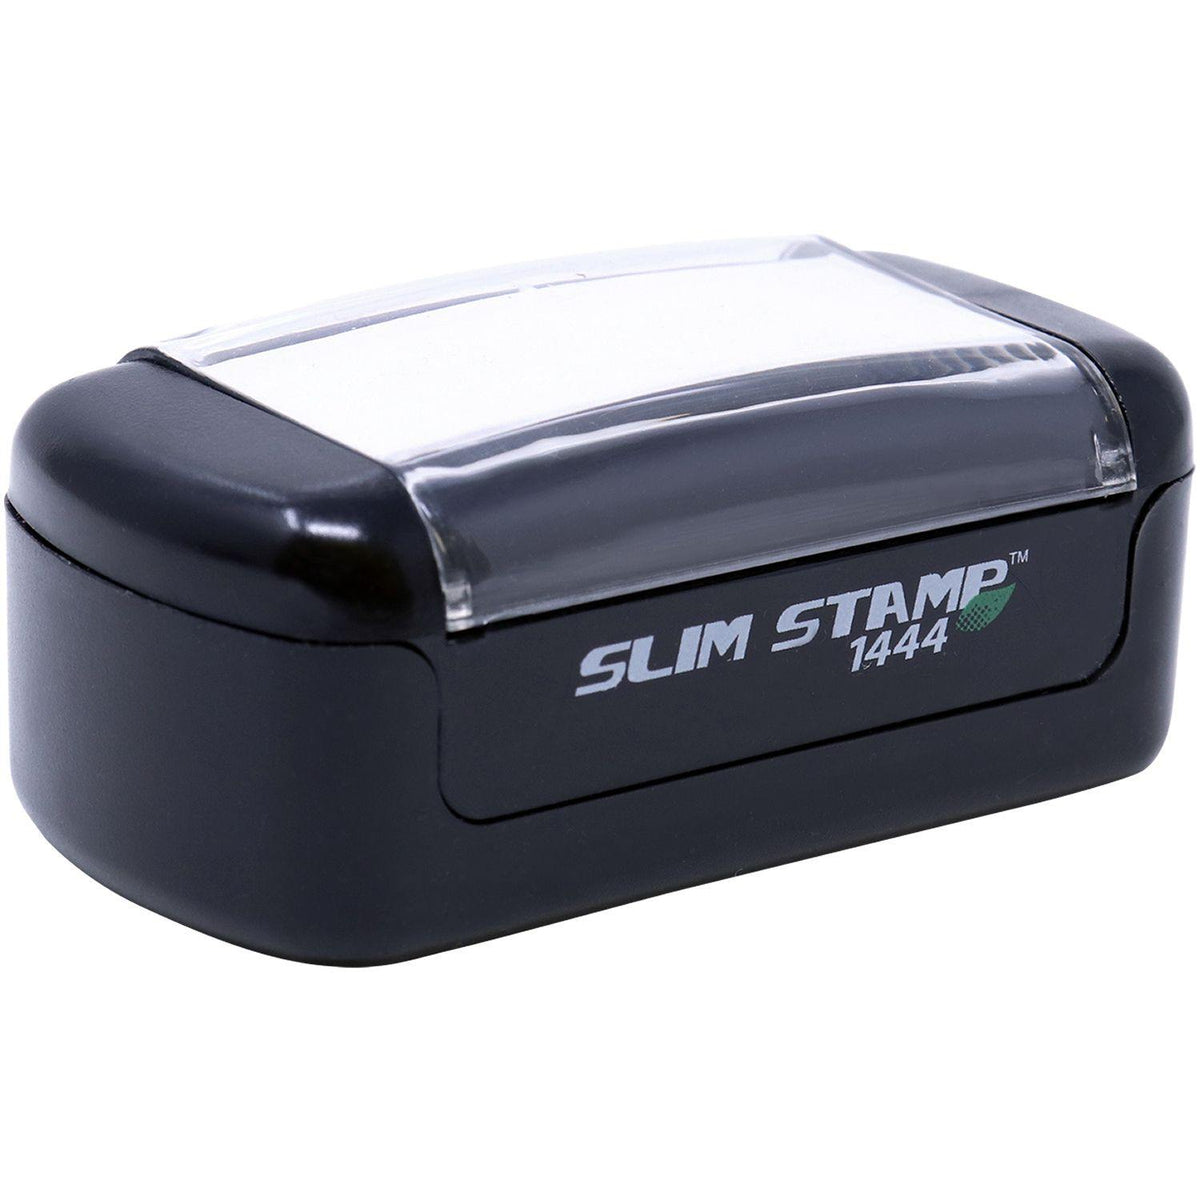 Alt View of Slim Pre-Inked Economy Mail Stamp Mount Angle